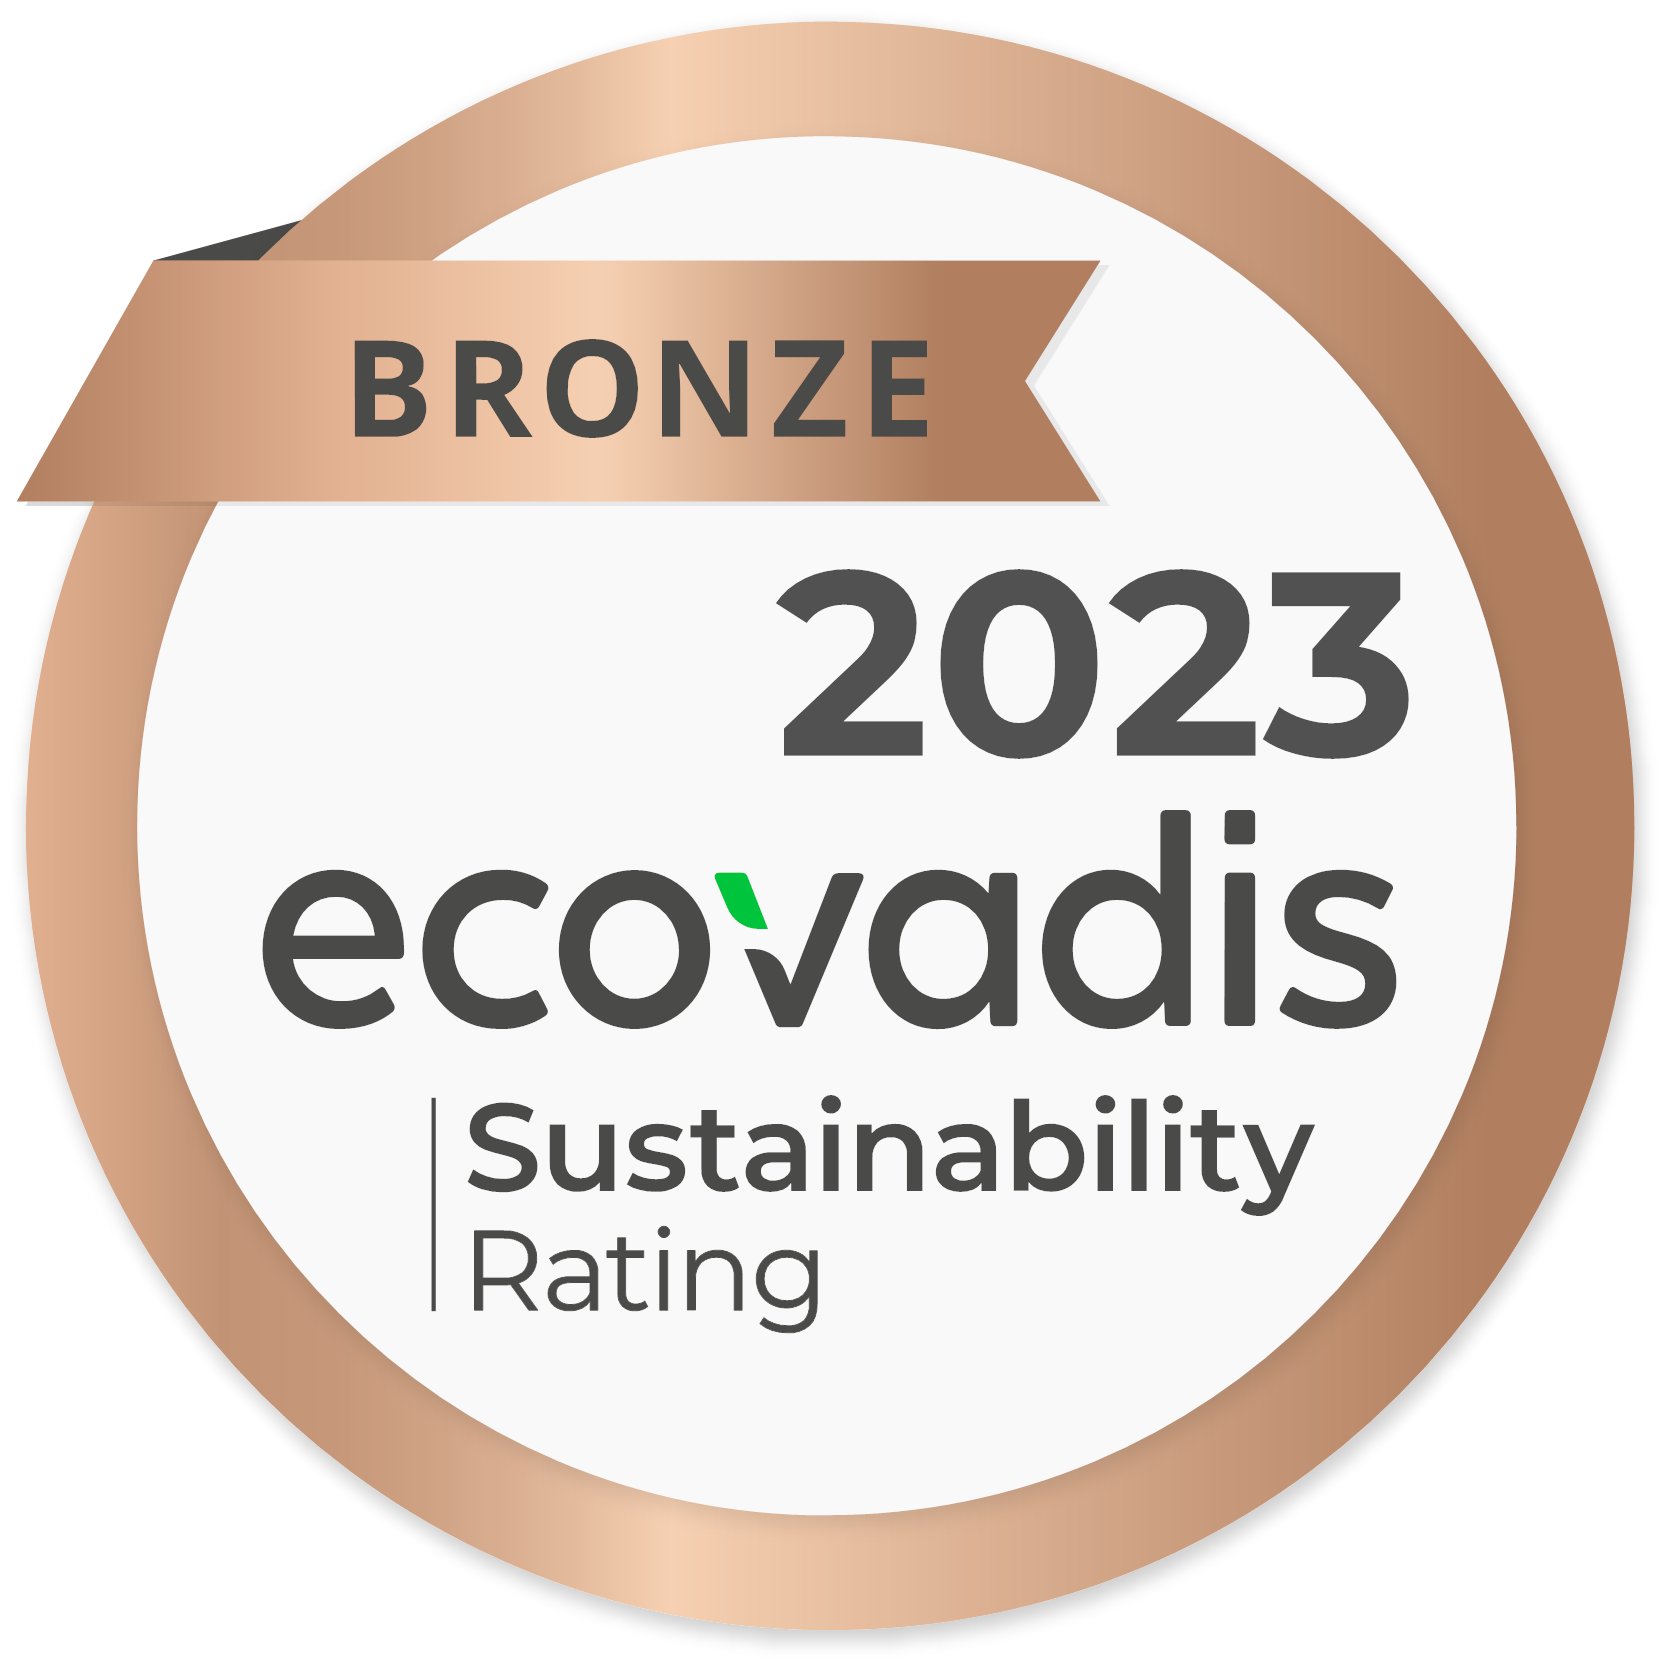 Ecovadis bronze sustainability rating for 2023